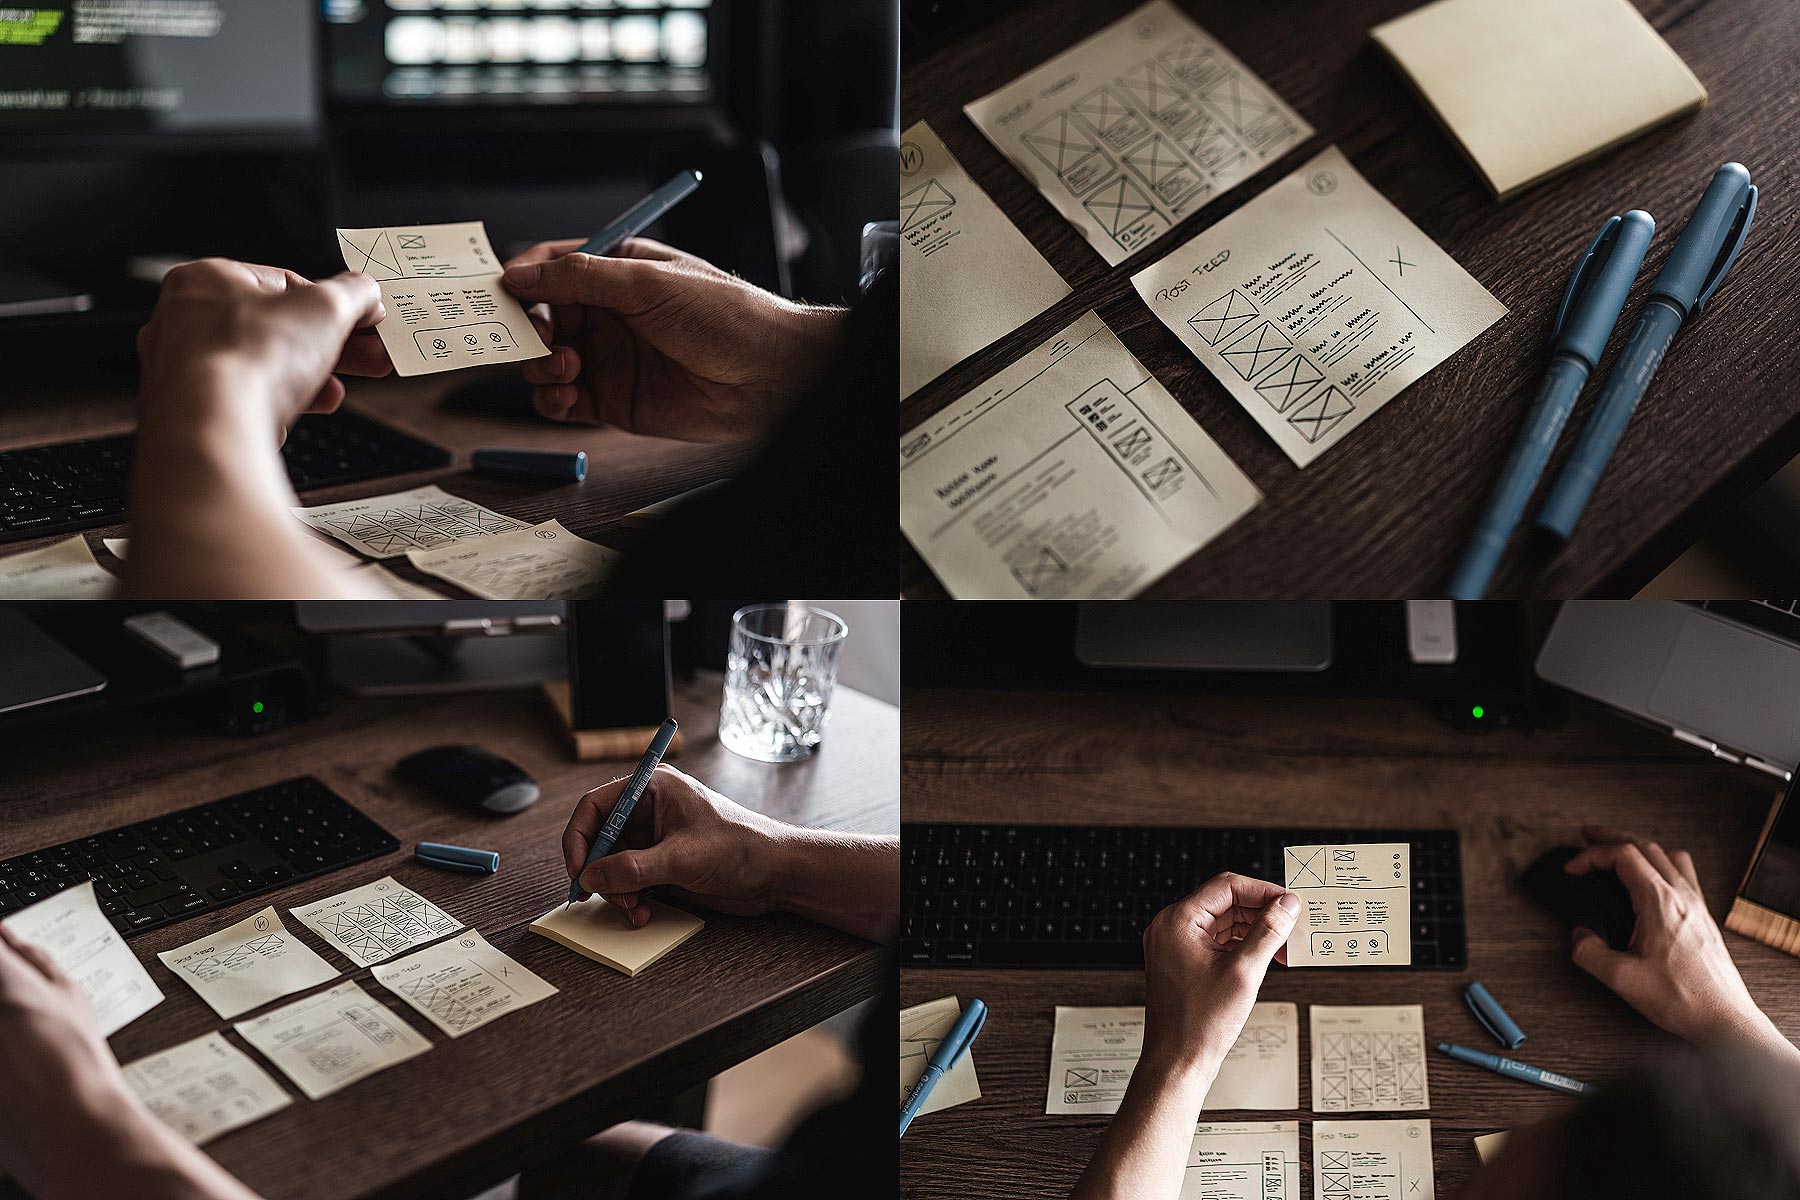 Download hi-res stock photos from our Wireframes PREMIUM Collection!